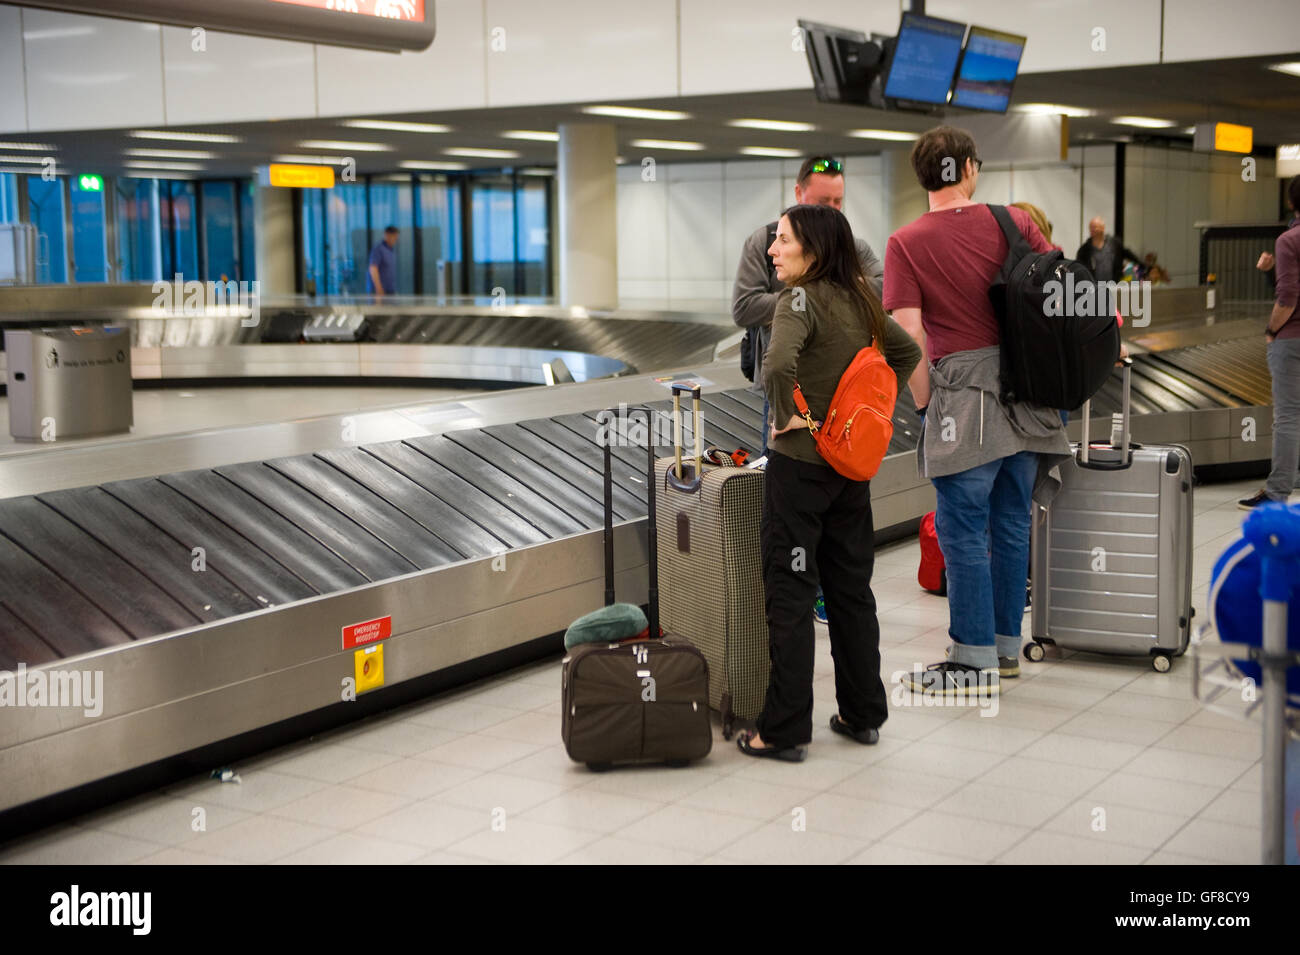 AMSTERDAM, THE NETHERLANDS - MAY 05, 2016: People are waiting on an airport at the luggage belt for their suitcases to arrive. Stock Photo